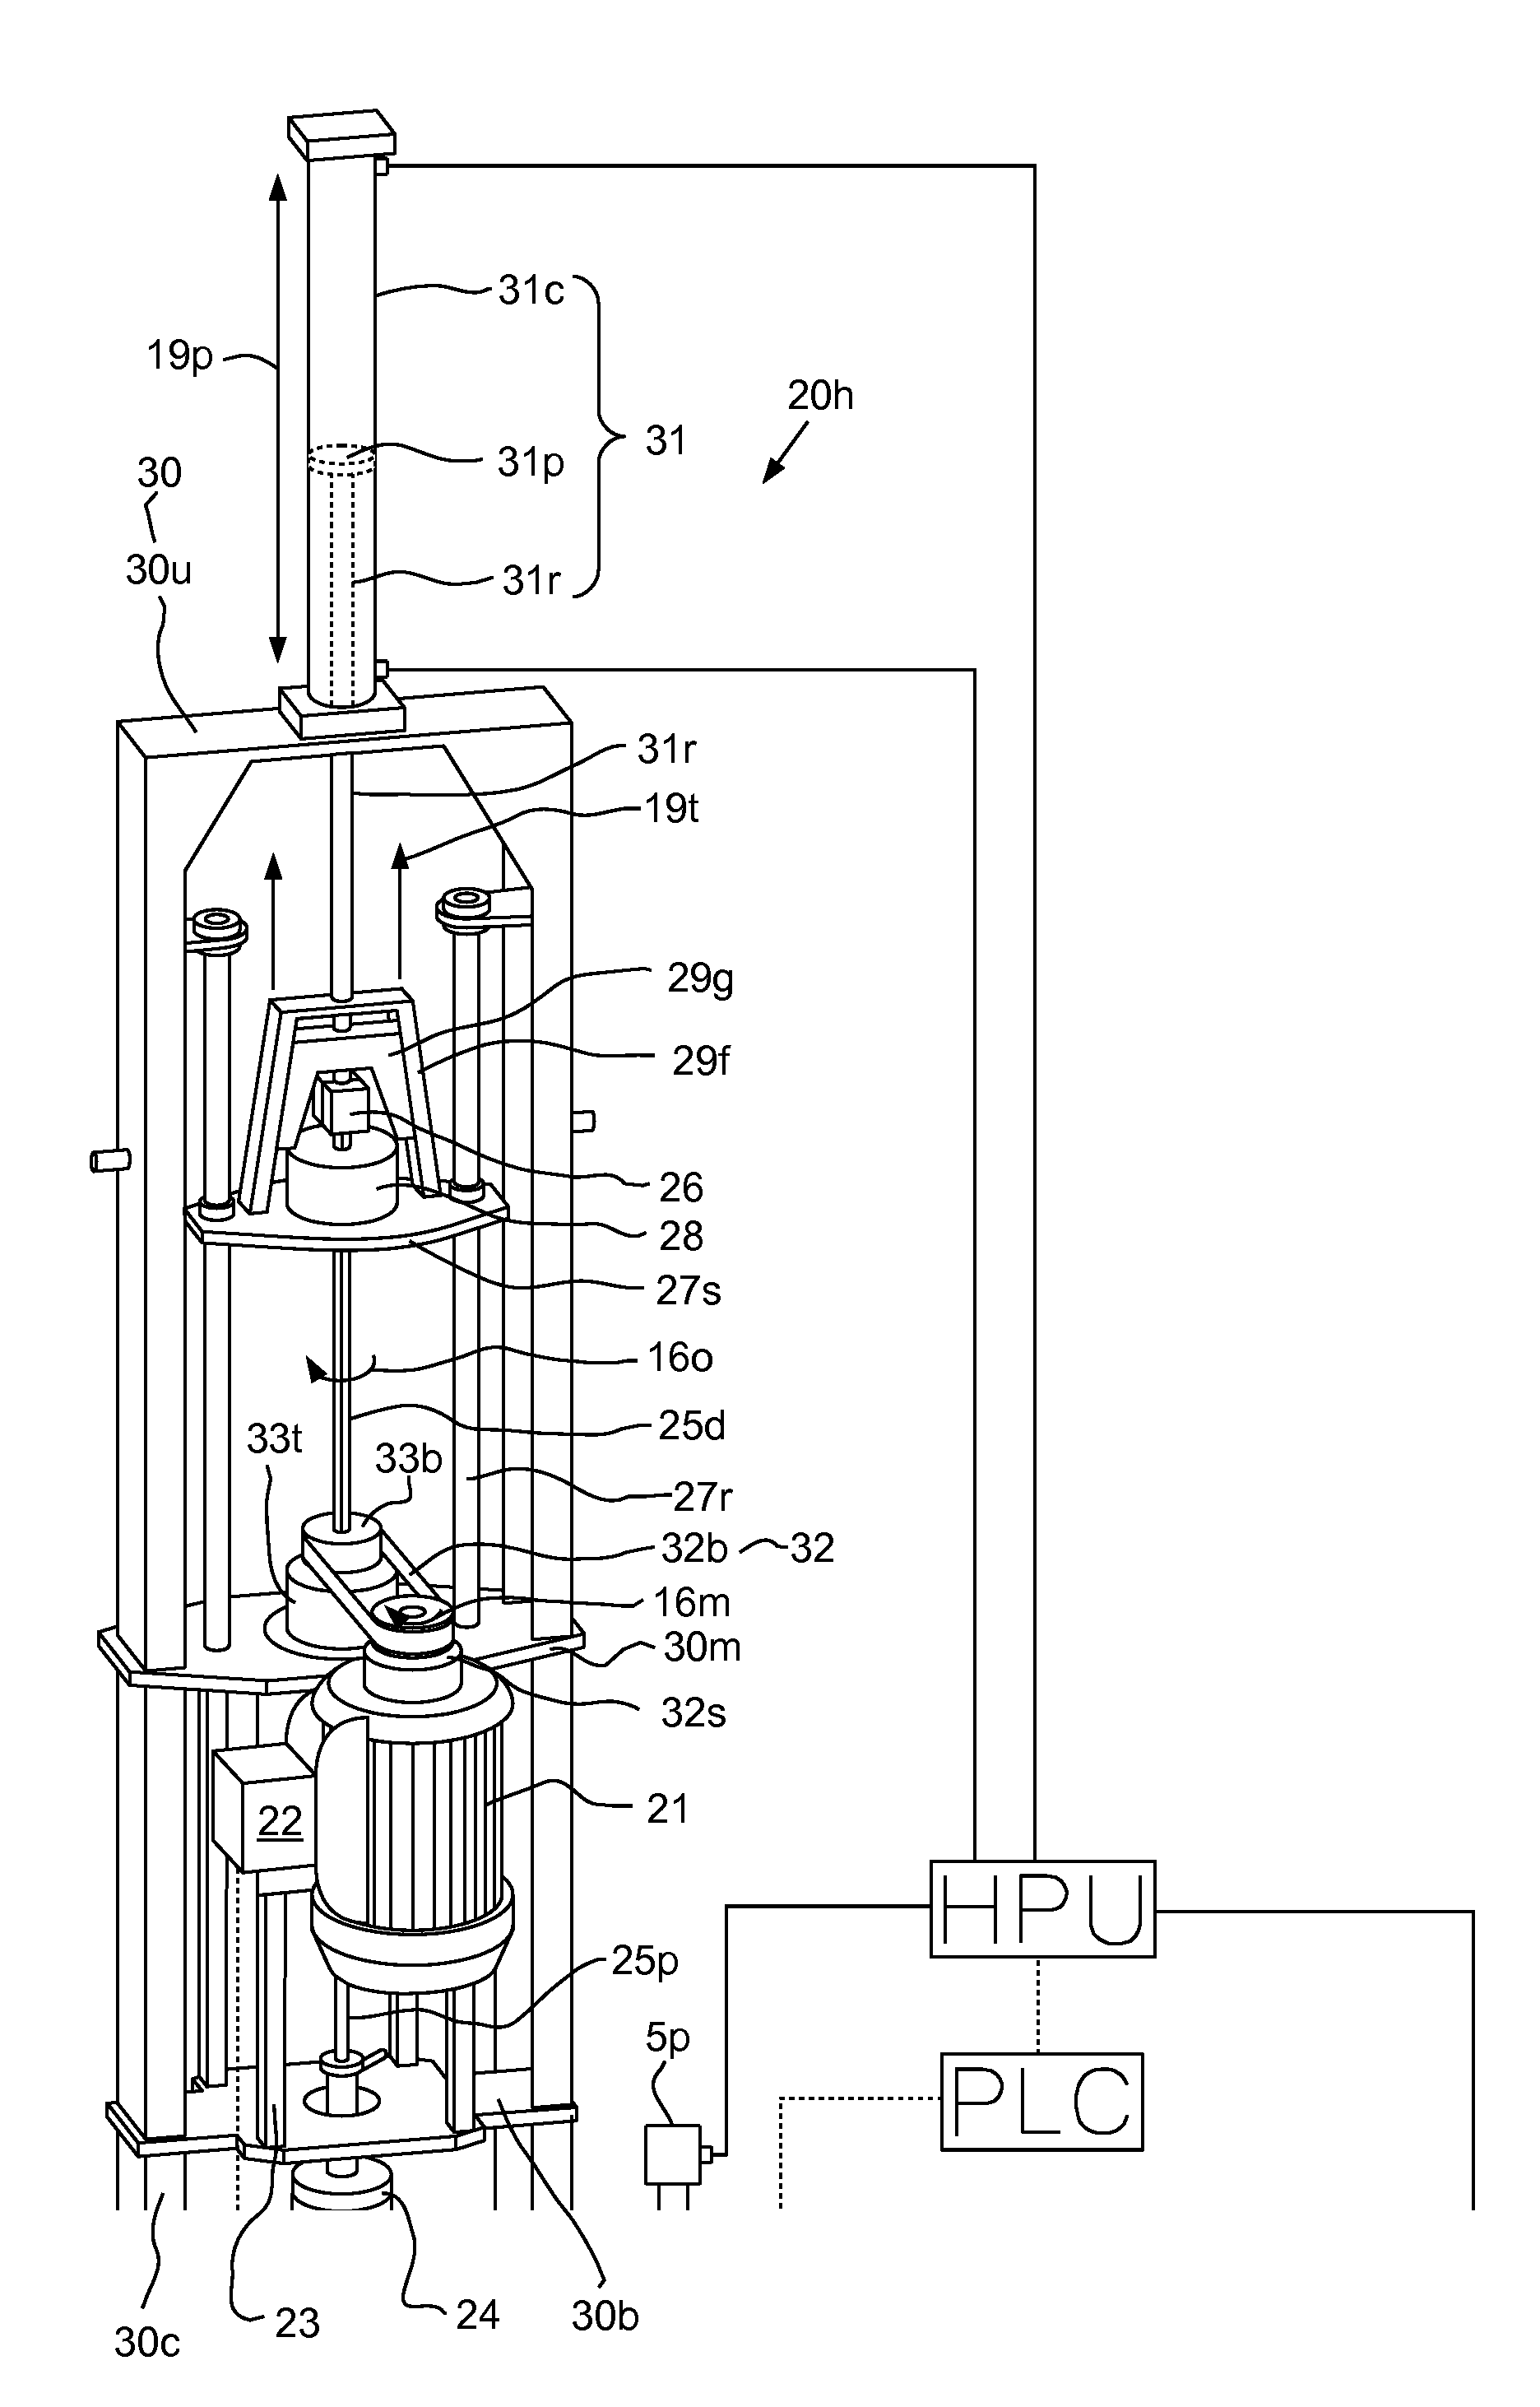 Rod driven centrifugal pumping system for adverse well production